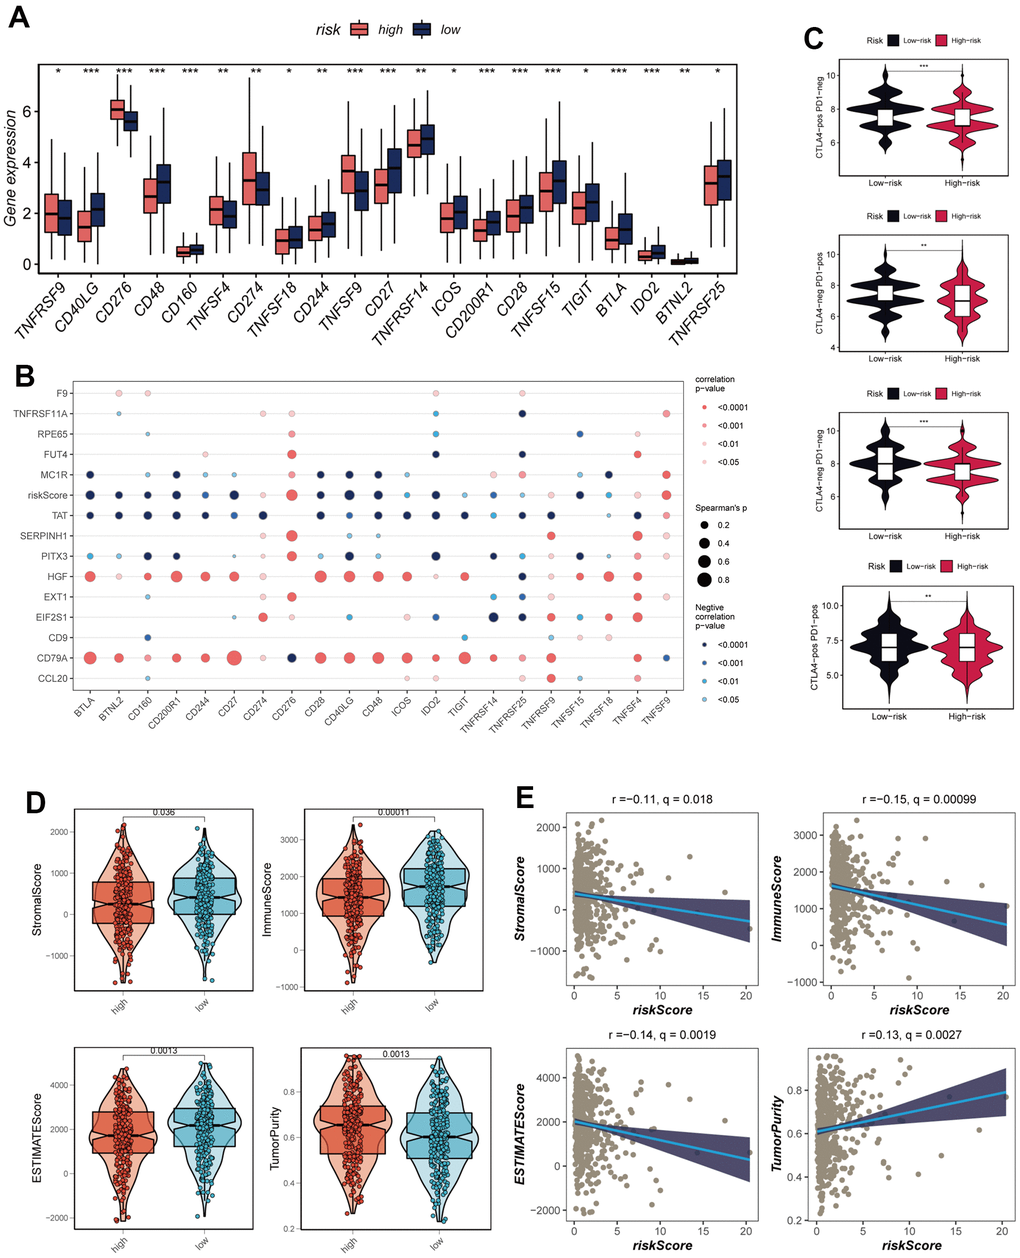 Analysis of immune cell content and immune checkpoint. (A) A box plot showed that differences in immune checkpoint gene expression between high- and low-risk groups. (B) Correlation between model genes and immune checkpoint. (C) The low-risk group has significantly greater IPS, IPS-CTLA4-neg-PD-1-neg, IPS-CTLA4-pos-PD-1-neg, IPS-CTLA4-neg-PD-1-pos, and IPS-CTLA4-pos-PD-1-pos. (D) The violin plot demonstrated the difference in Stromal Score, Immune Score, ESTIMATE Score, and tumor purity calculated using the ESTIMATE algorithm between the two risk subgroups. (E) The correlations in Stromal Score, Immune Score, ESTIMATE Score, and tumor purity were calculated using the ESTIMATE algorithm between the two risk subgroups. Note: *P P P 